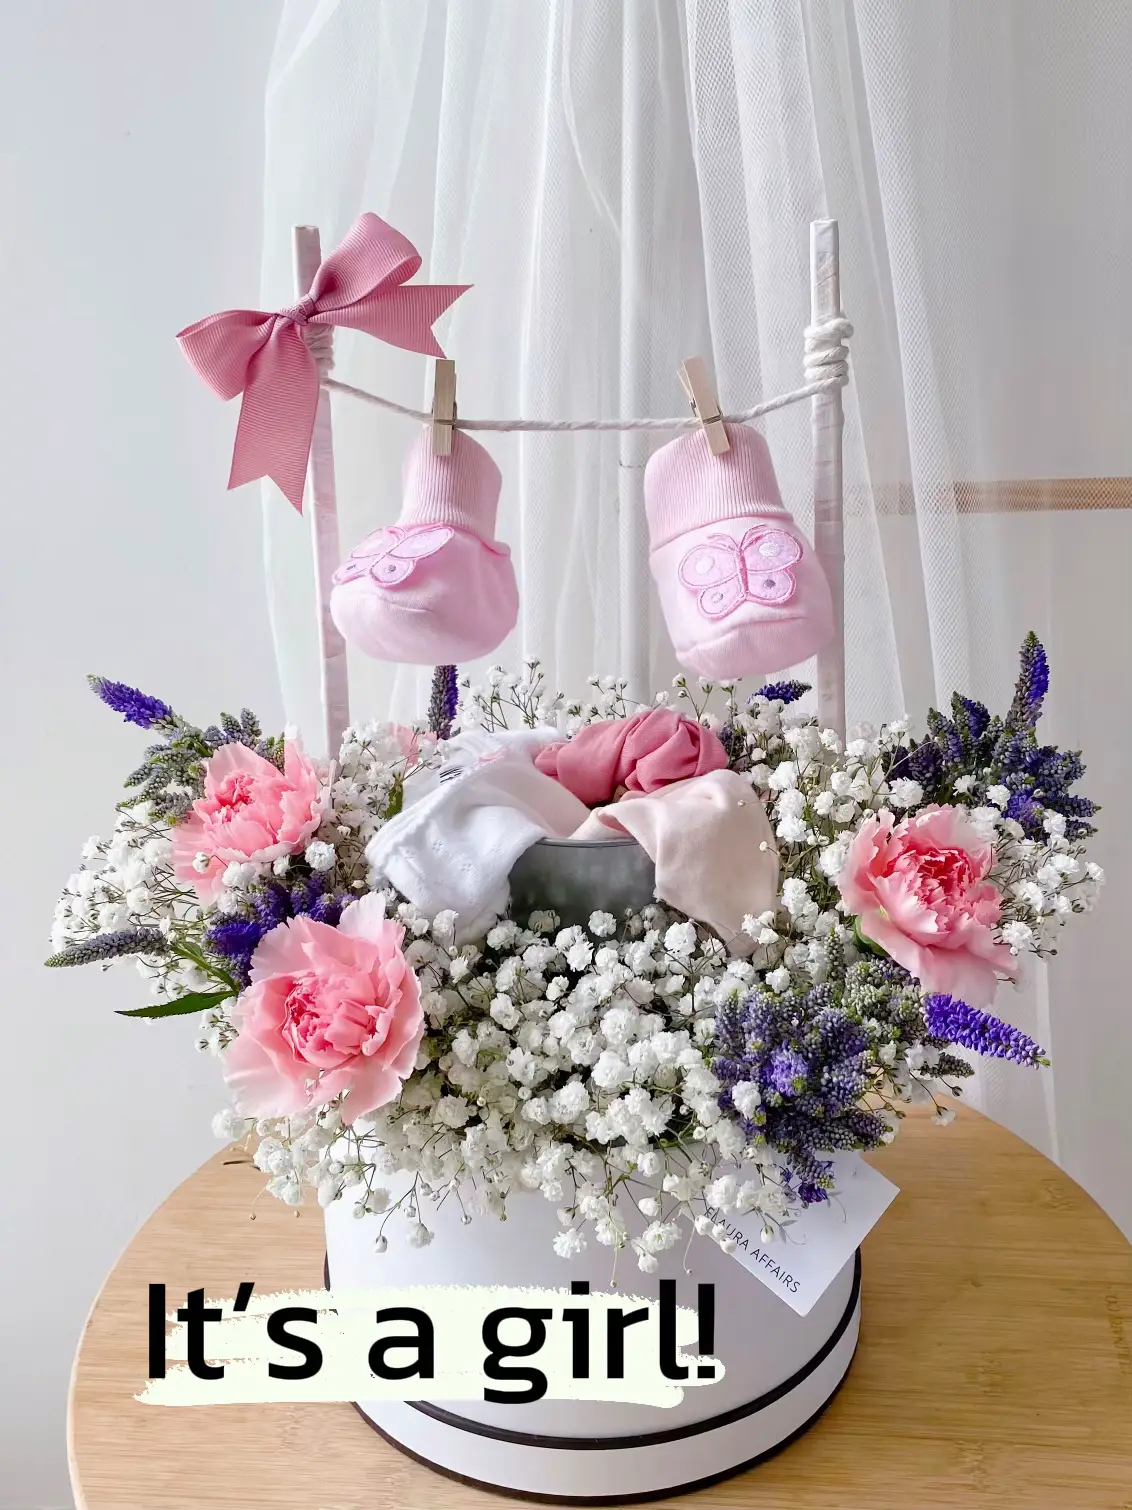 Flower bouquet ideas, Gallery posted by Cerita_opah